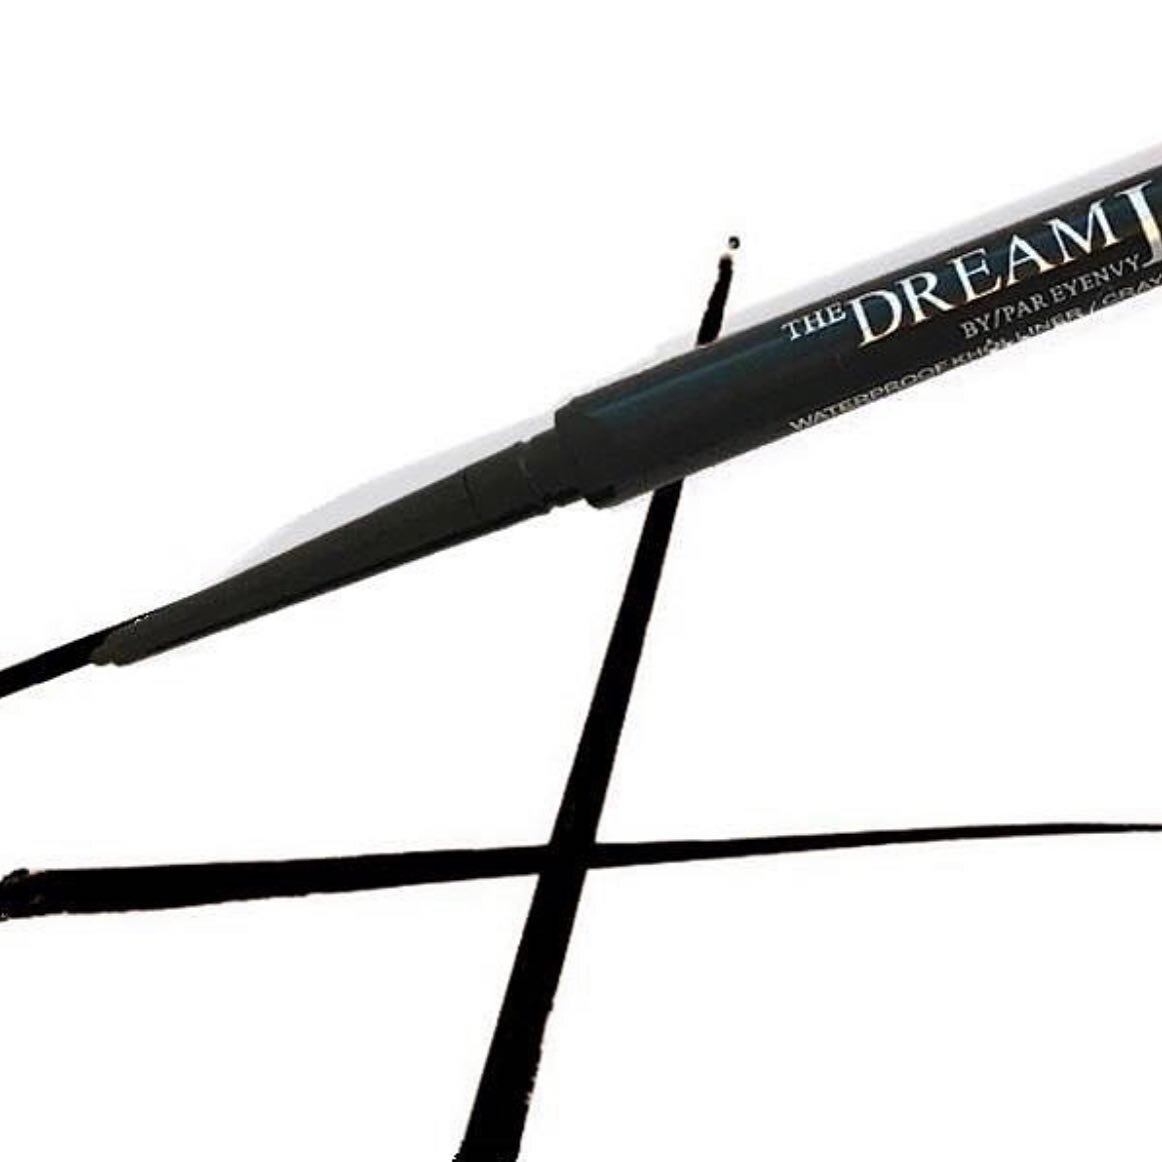 THE DREAM LINER &mdash; A black 1.5mm fine tip twist pencil, is designed to easily reach in between the lashes and create a perfectly winged line. 

This long wear pencil allows you to create different desired styles with the best control fo create t